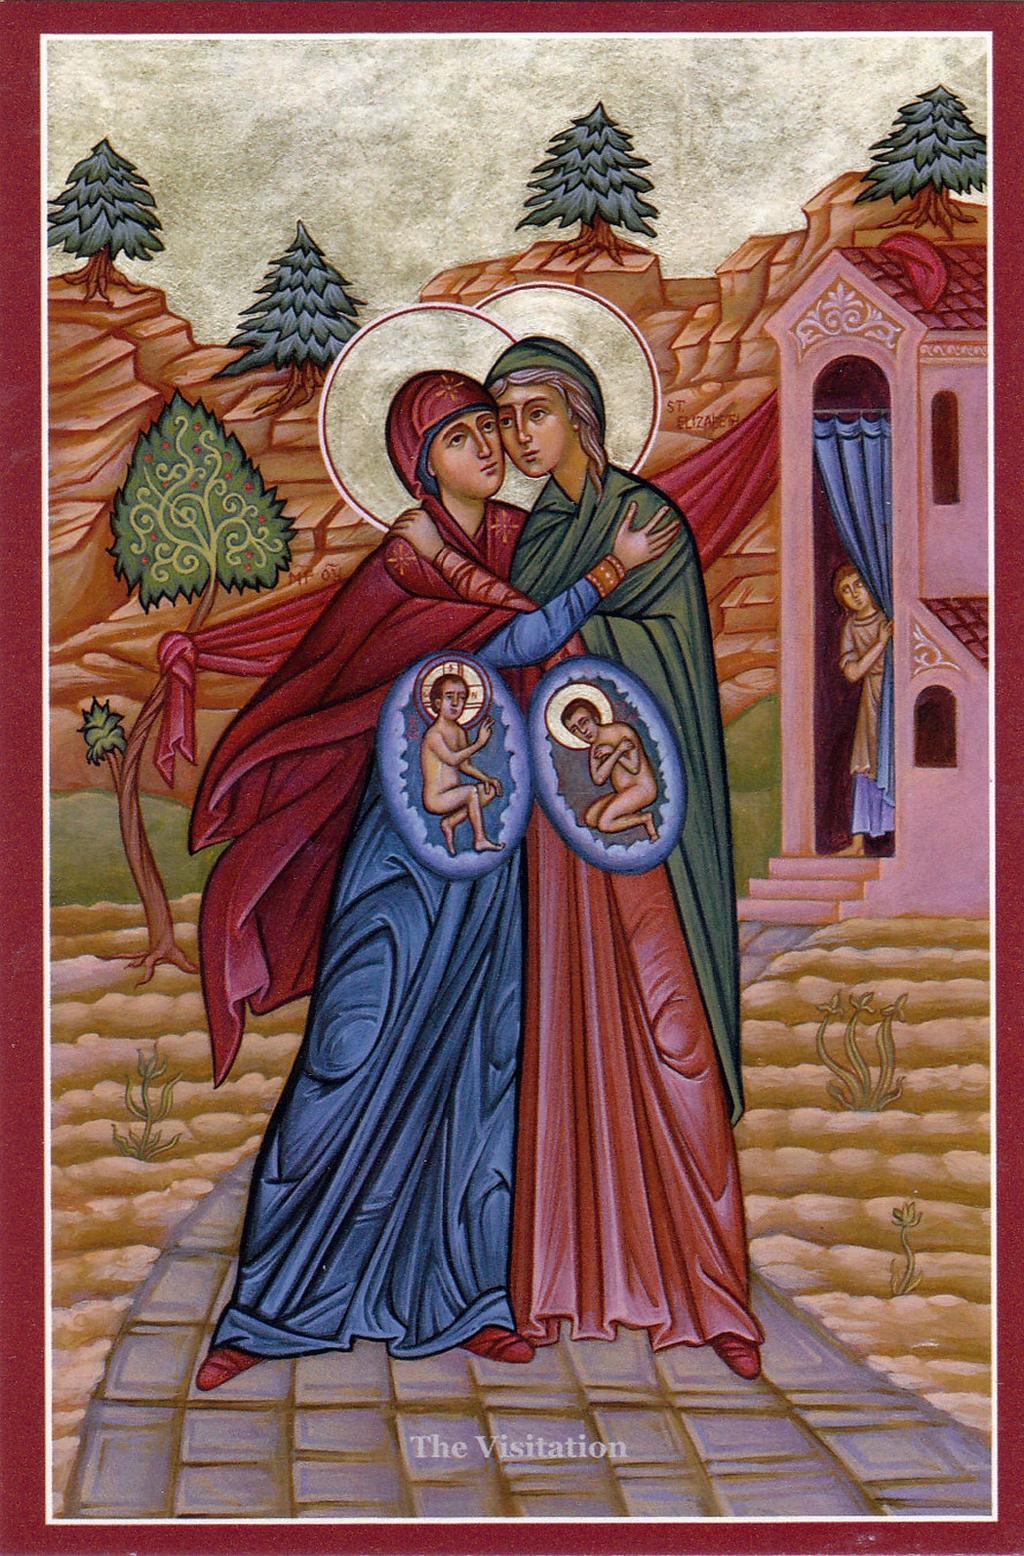 the Blessed Virgin Mary (Luke 1:46-55), at her Visitation to her cousin Elizabeth. John the Baptist leapt in the womb, with joy, at the presence of the Word made flesh.